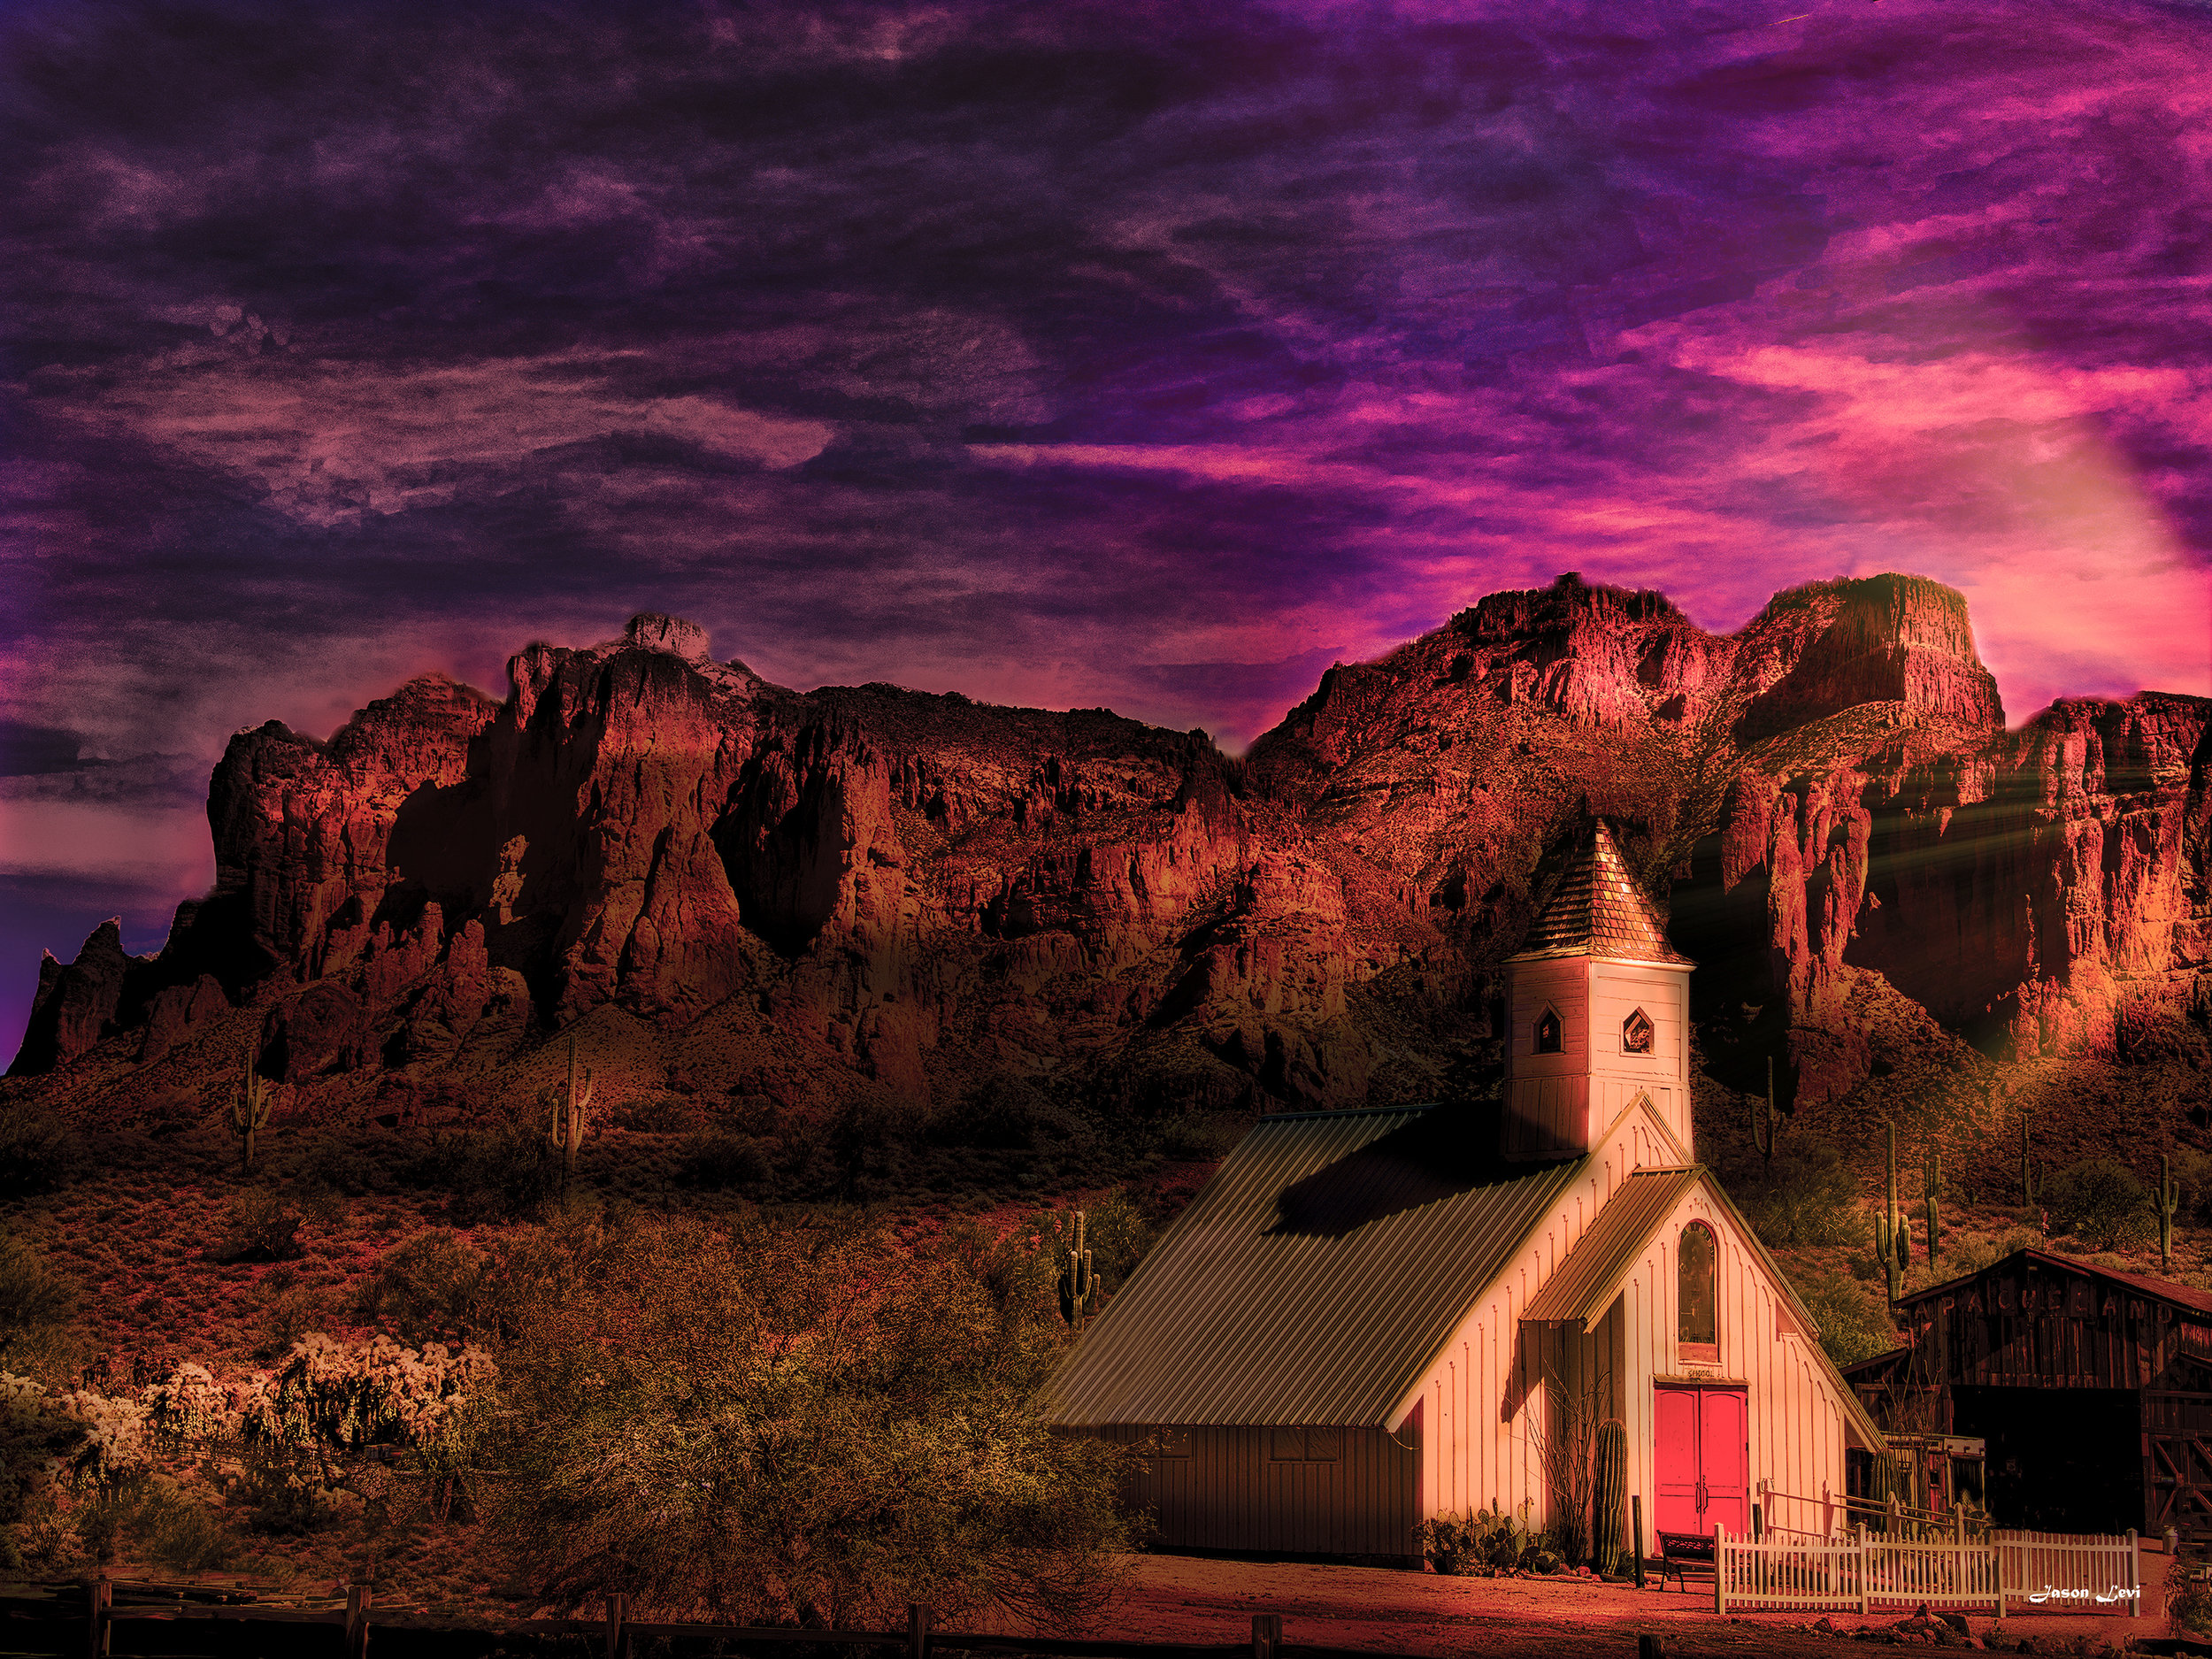 Dawn at the Superstition Mountains